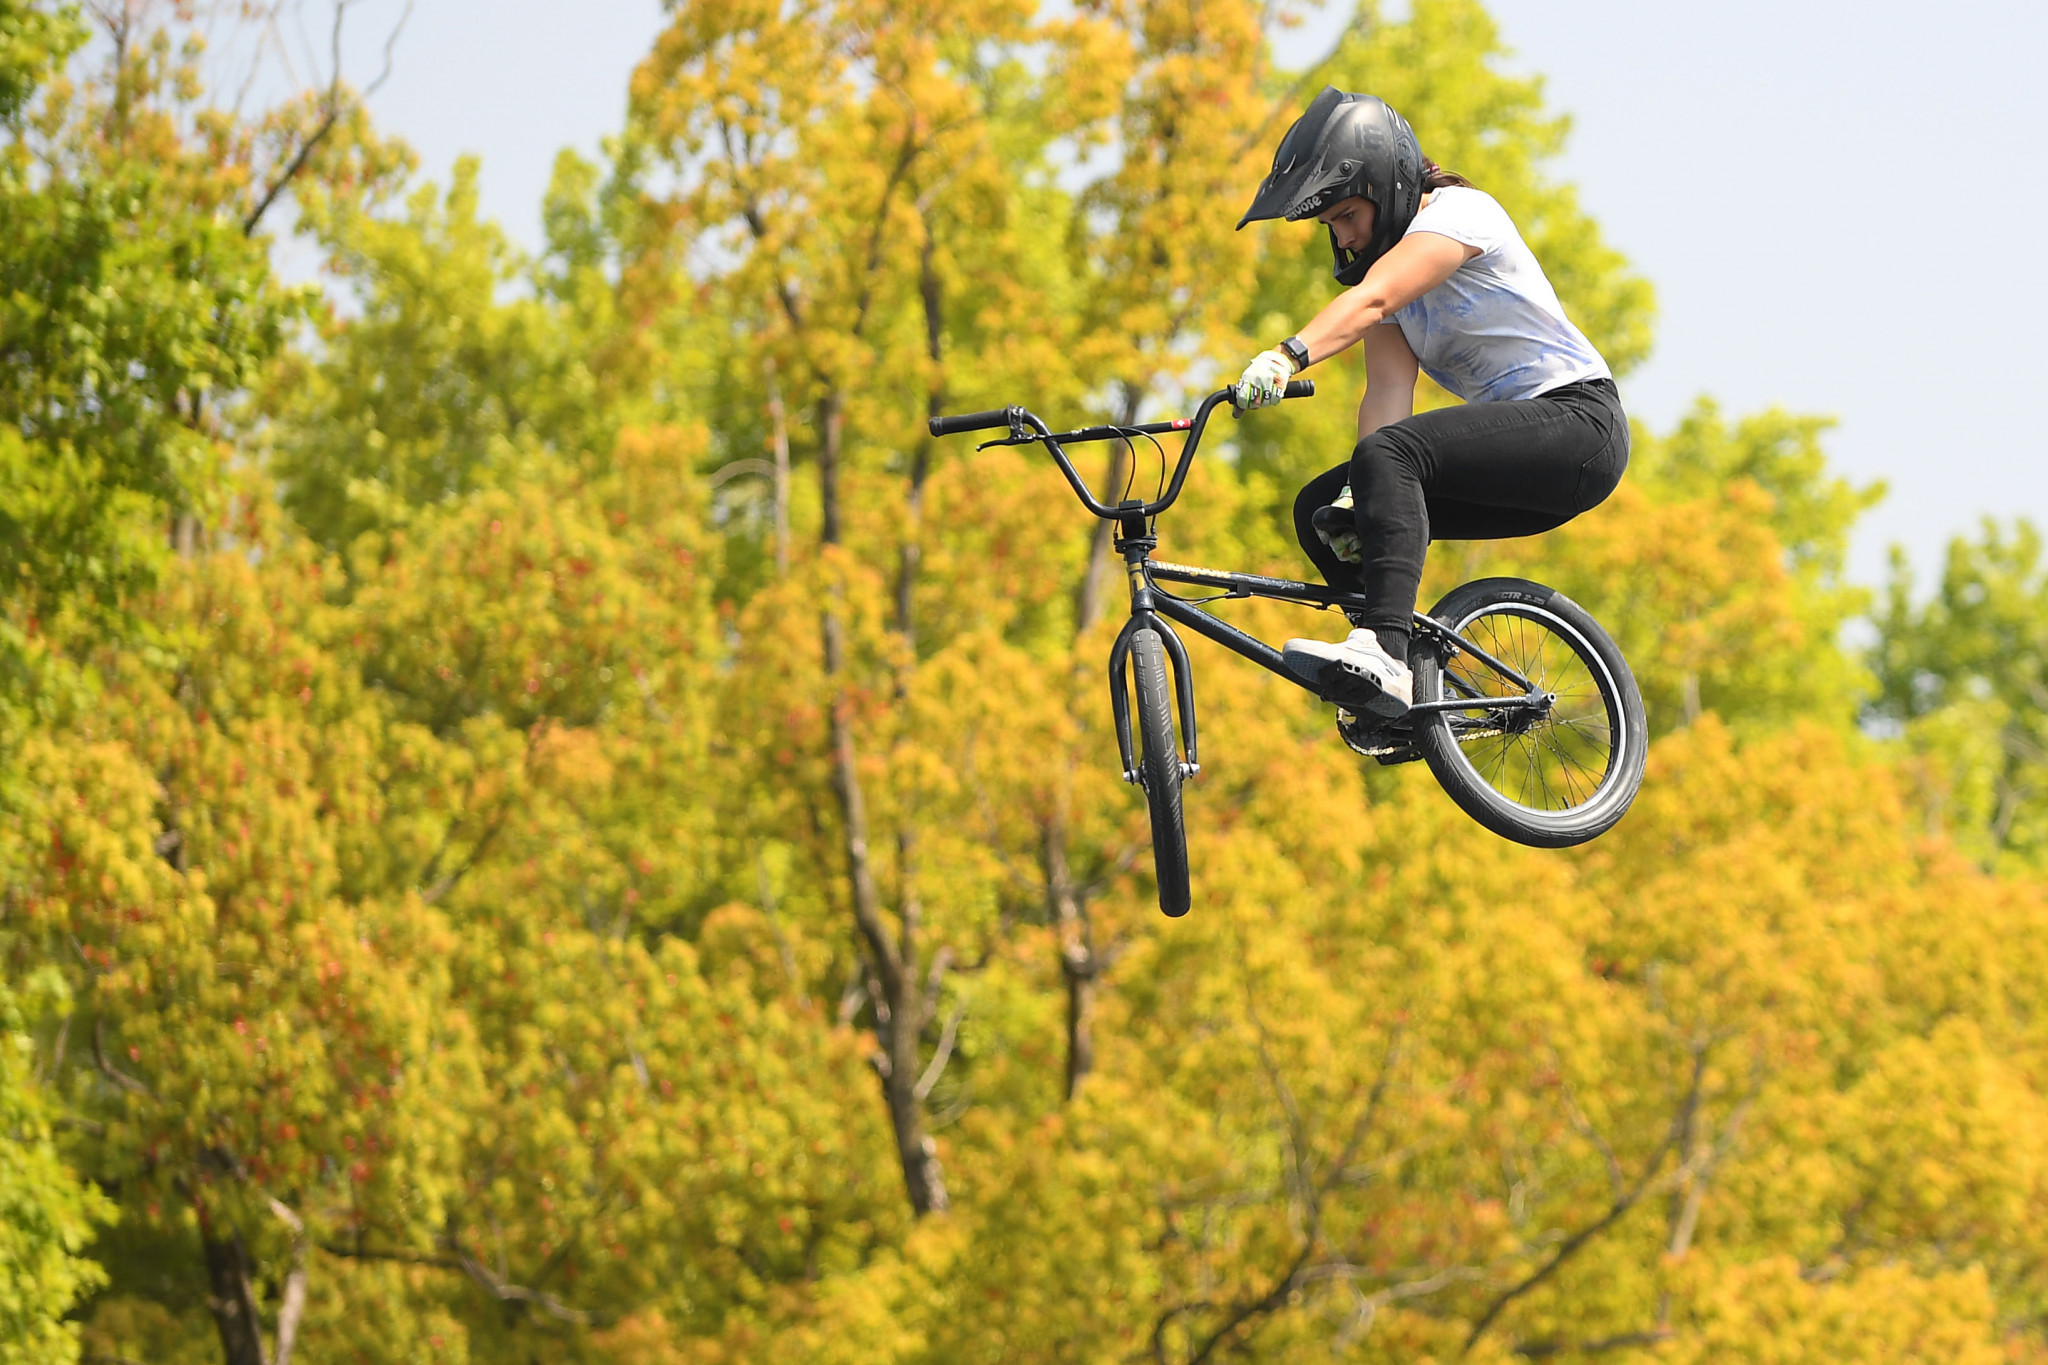 Switzerland's Nikita Ducarroz is set to be among the contenders in the women's BMX freestyle ©Getty Images